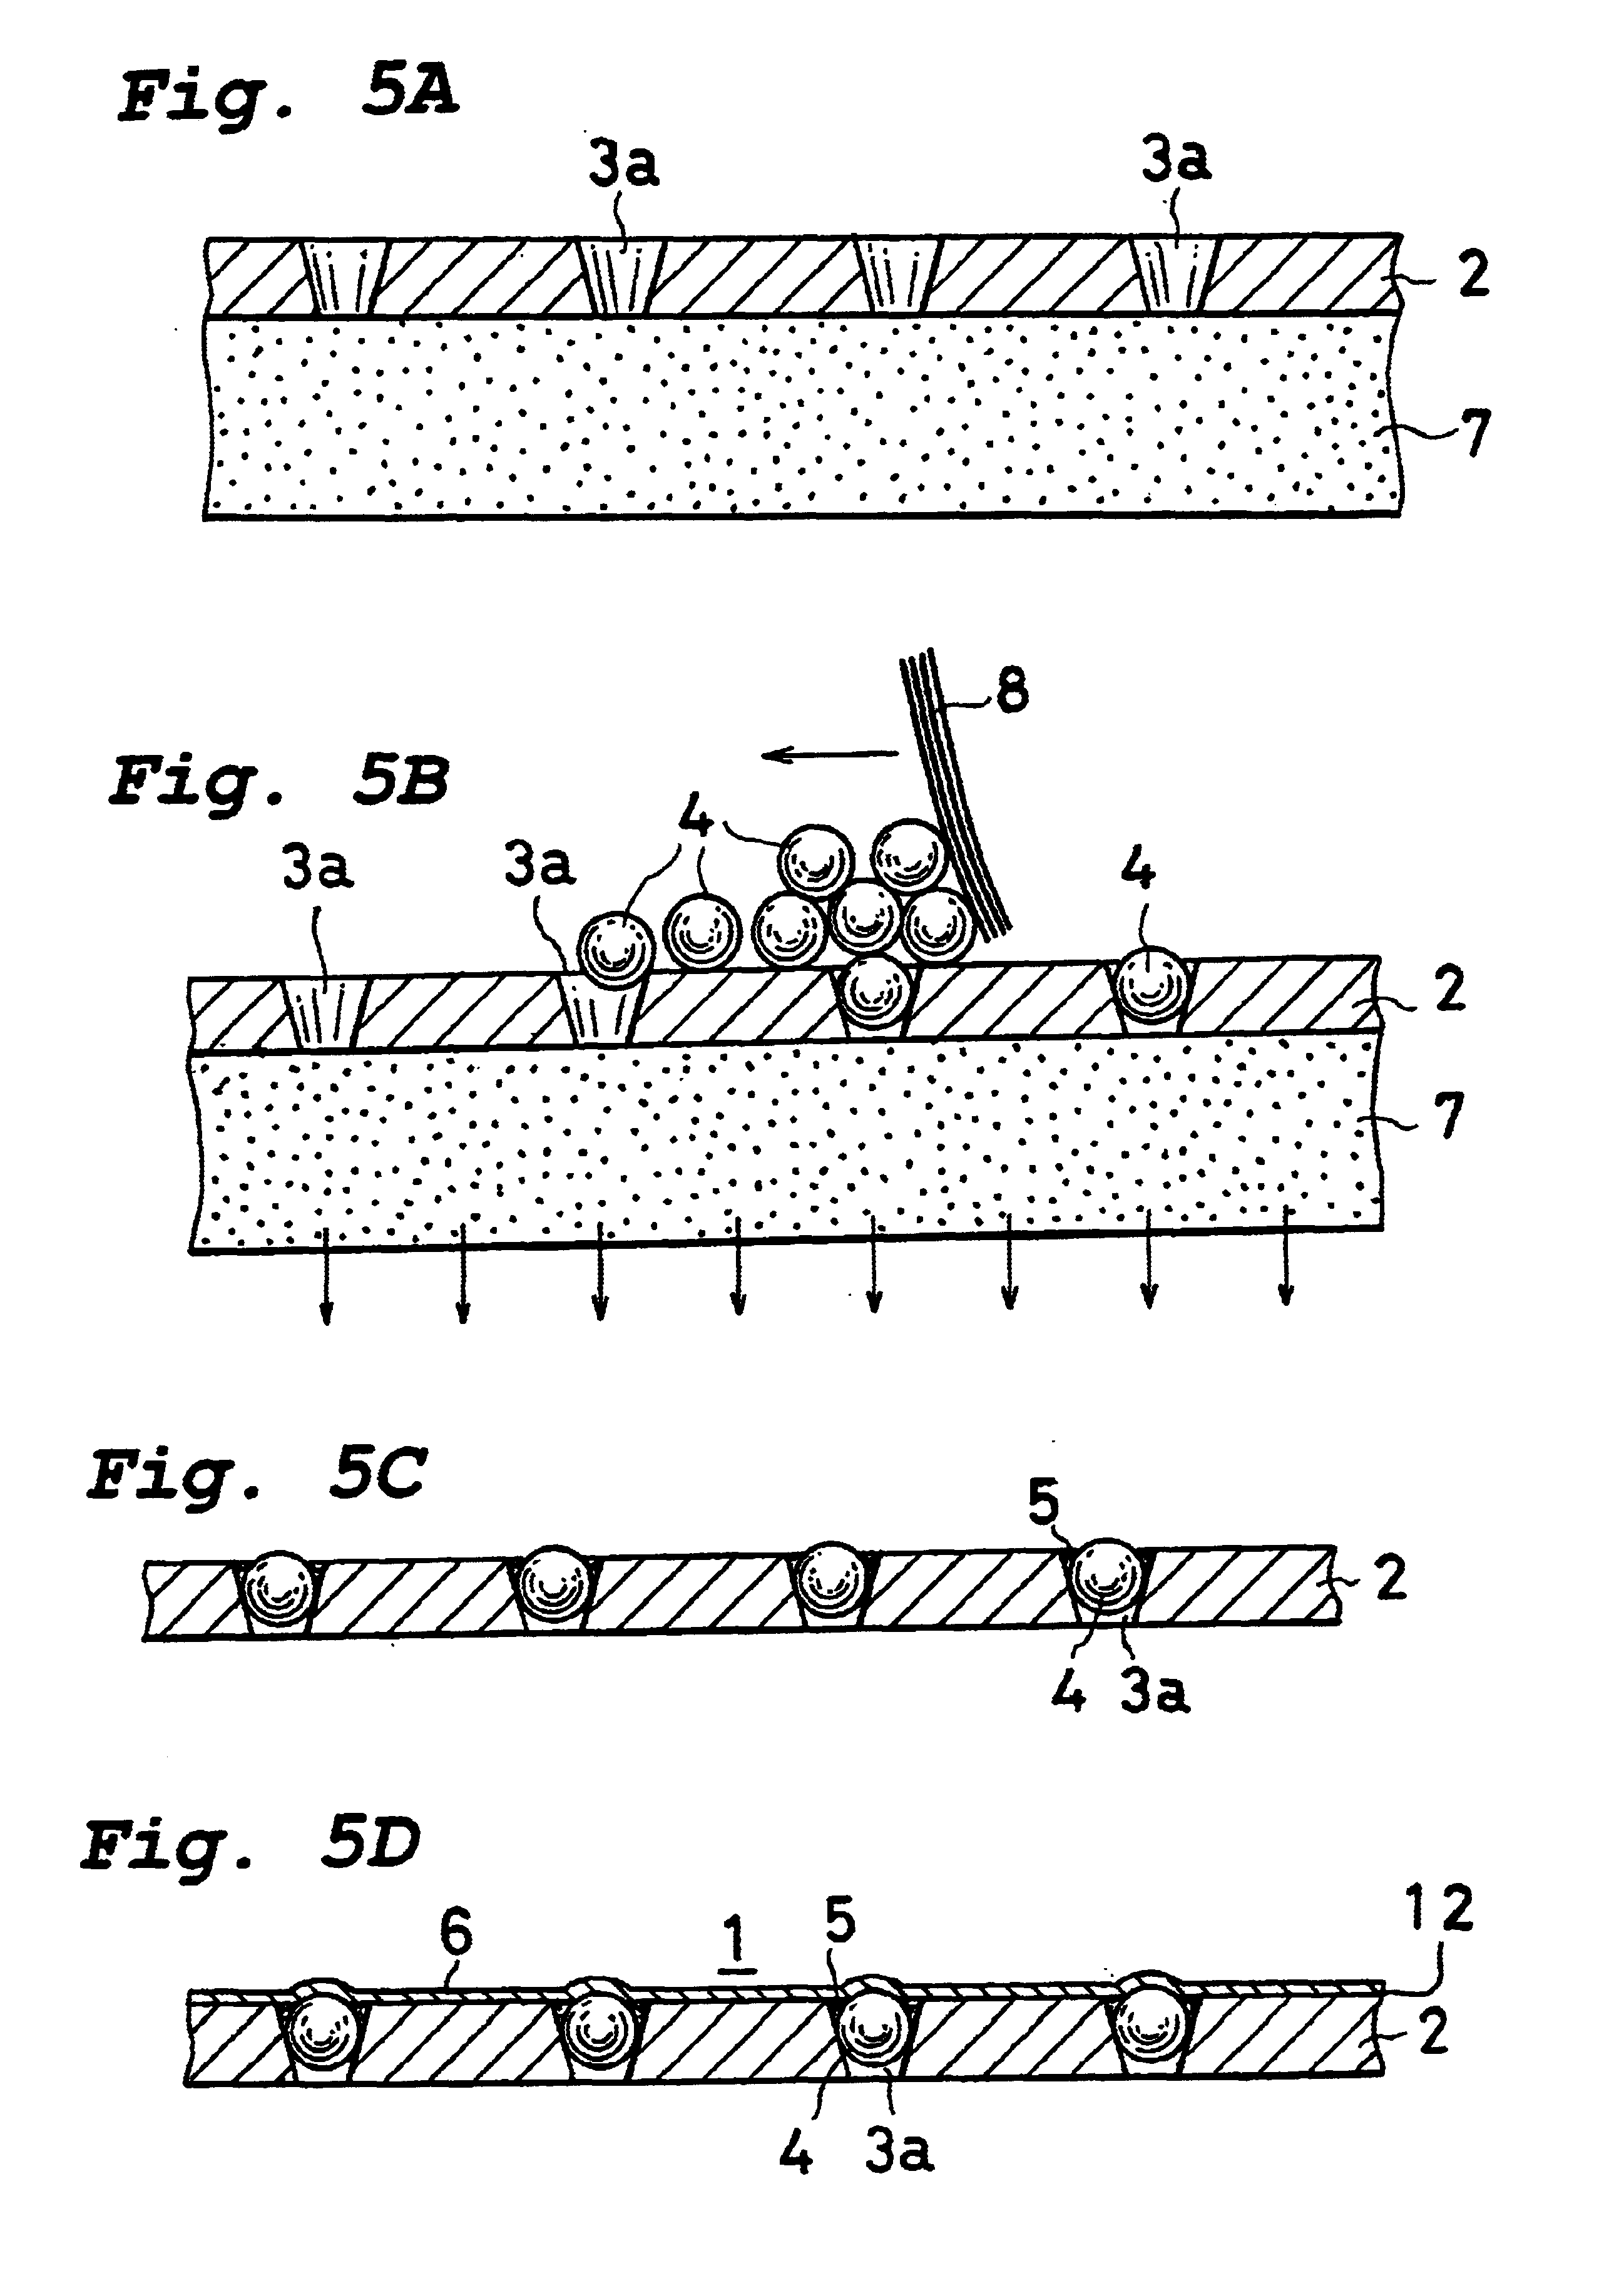 Solder ball assembly, a method for its manufacture, and a method of forming solder bumps